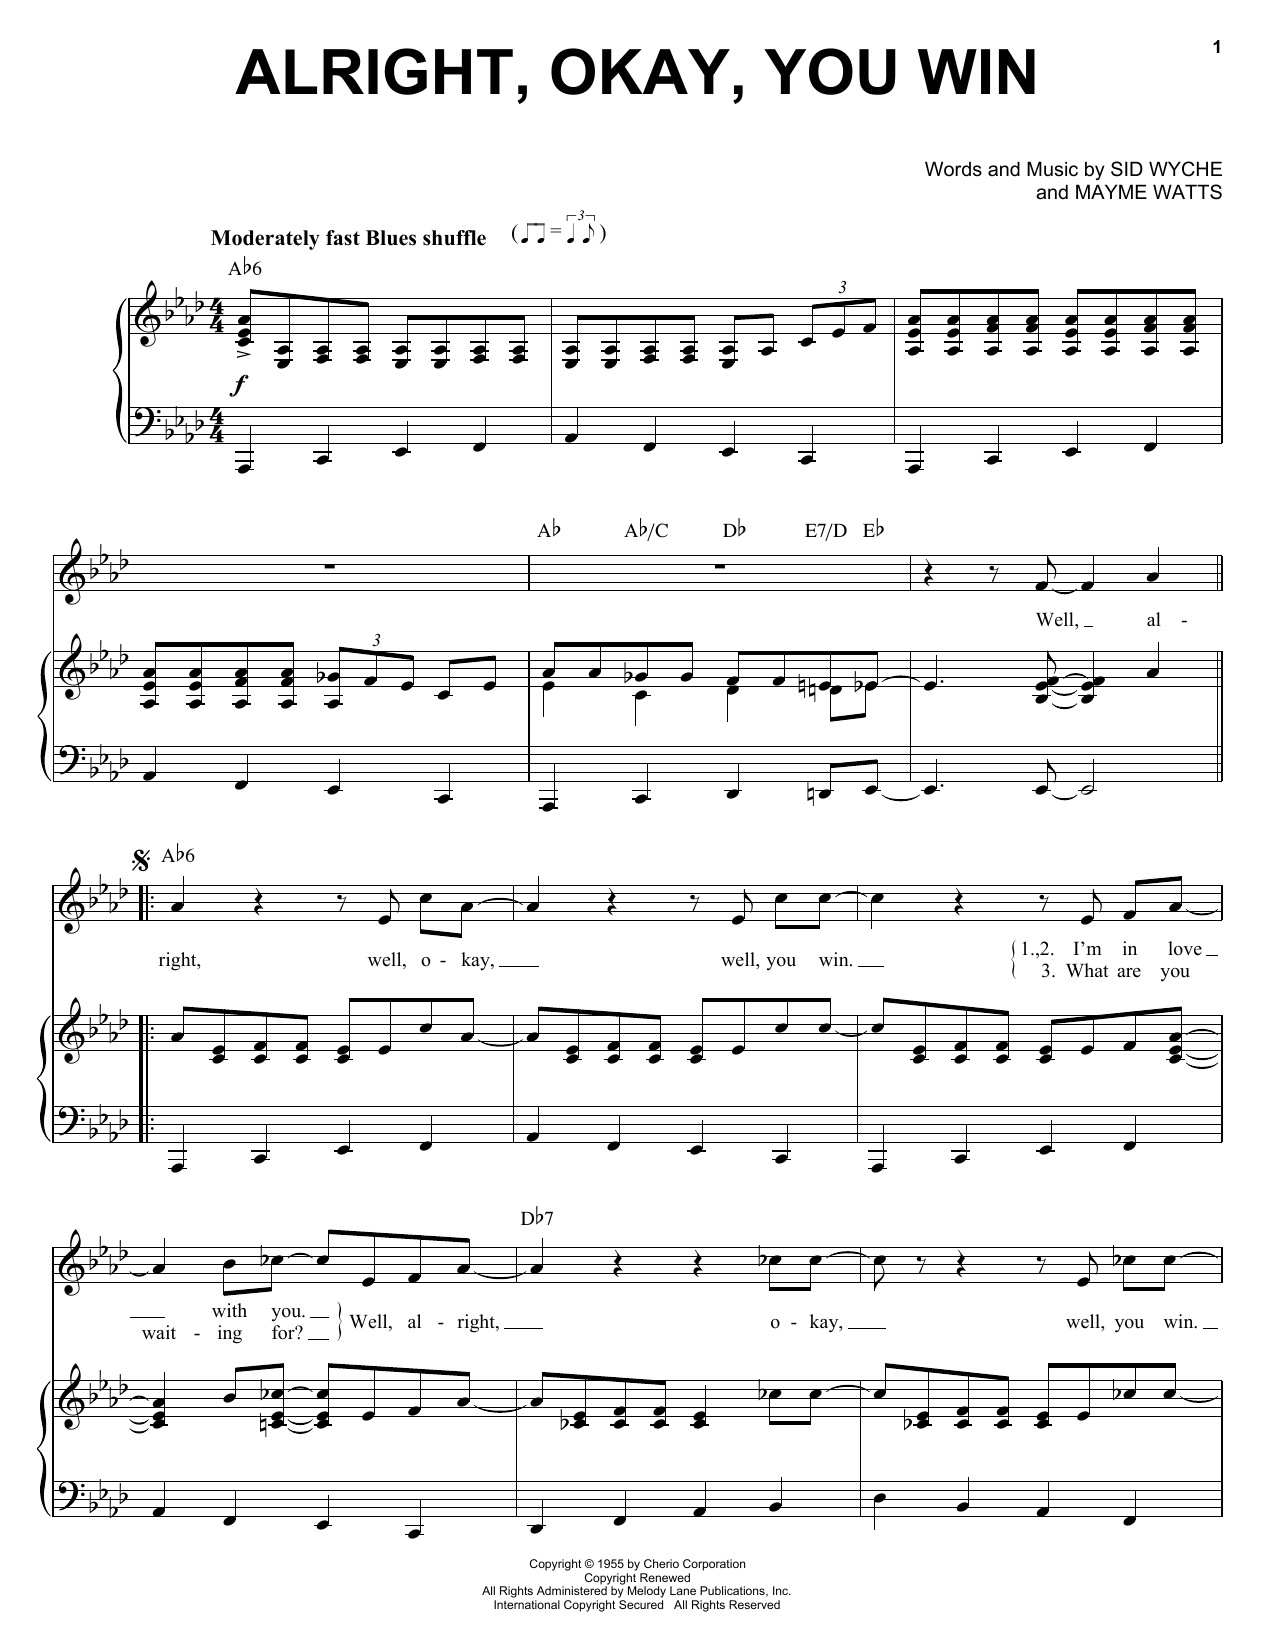 Download Peggy Lee Alright, Okay, You Win Sheet Music